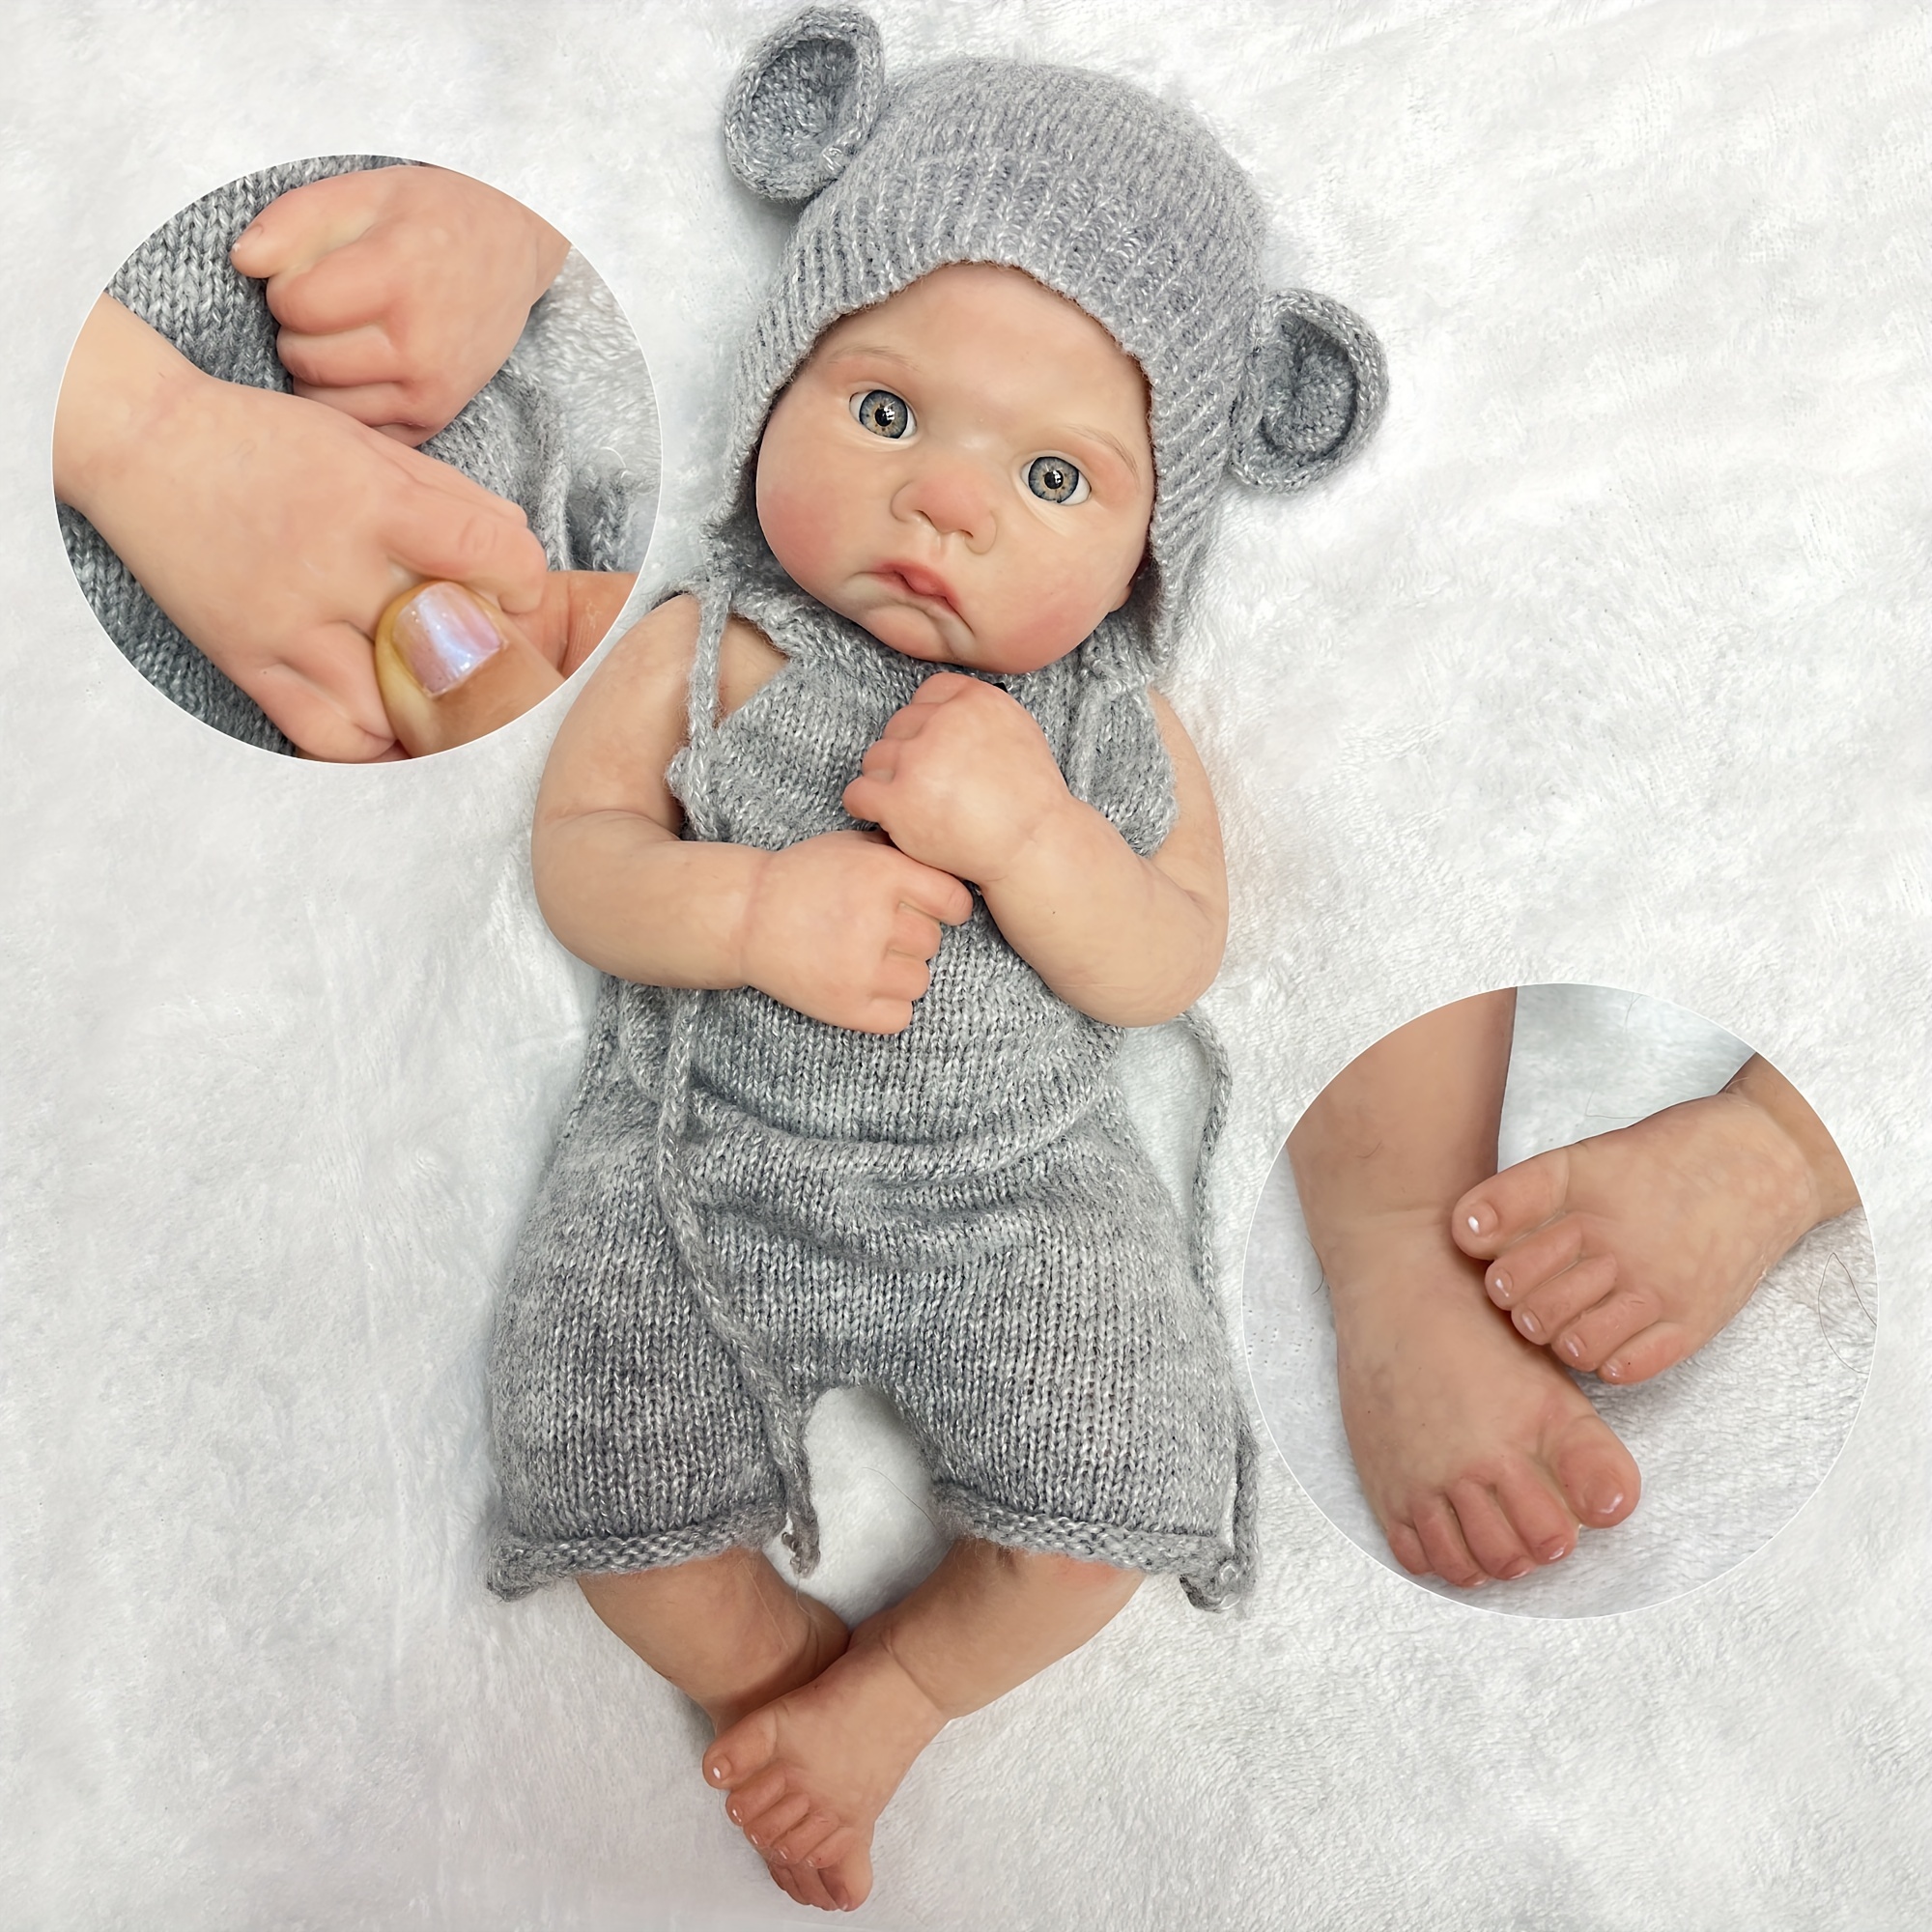 Reborn Dolls Can Drink Milk&pee Full Body Soft Solid Silicone Bebe